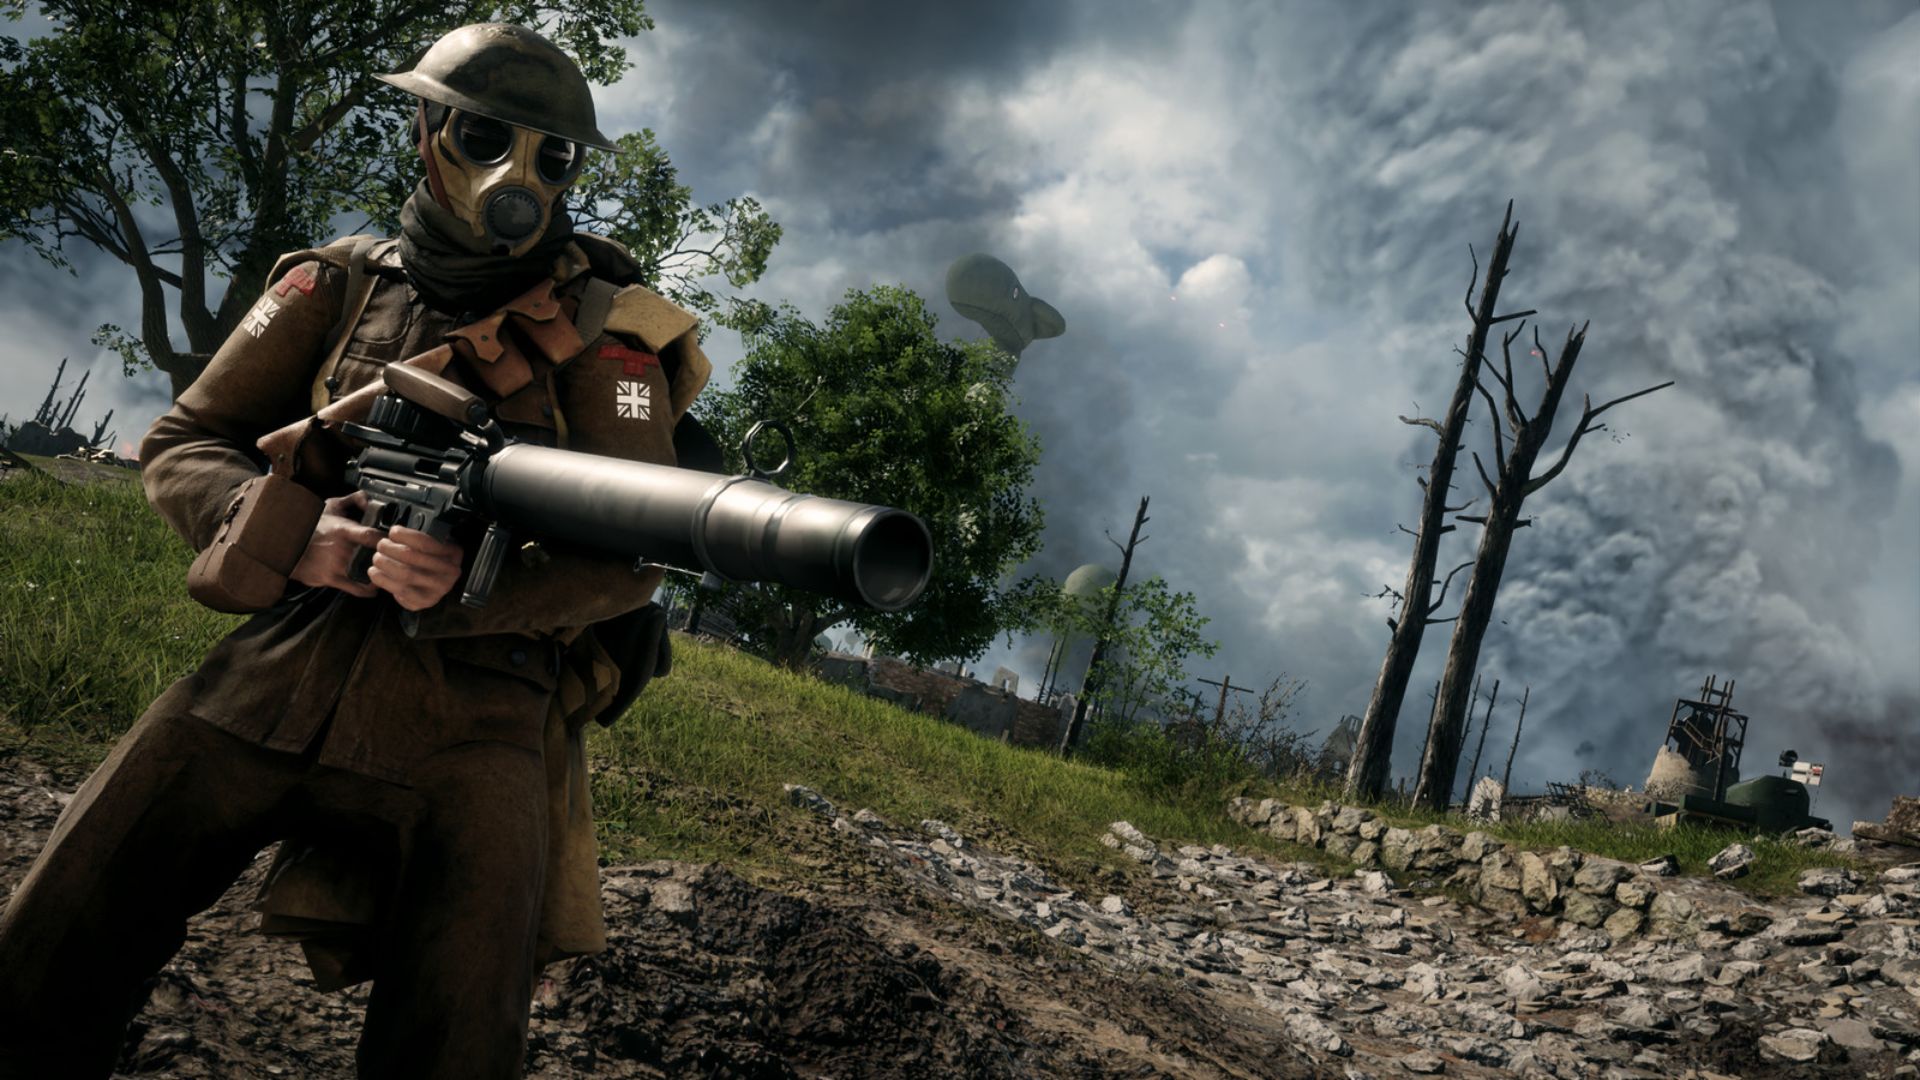 Best Xbox FPS games: a soldier in a gas mask readies his weapon in Battlefield 1